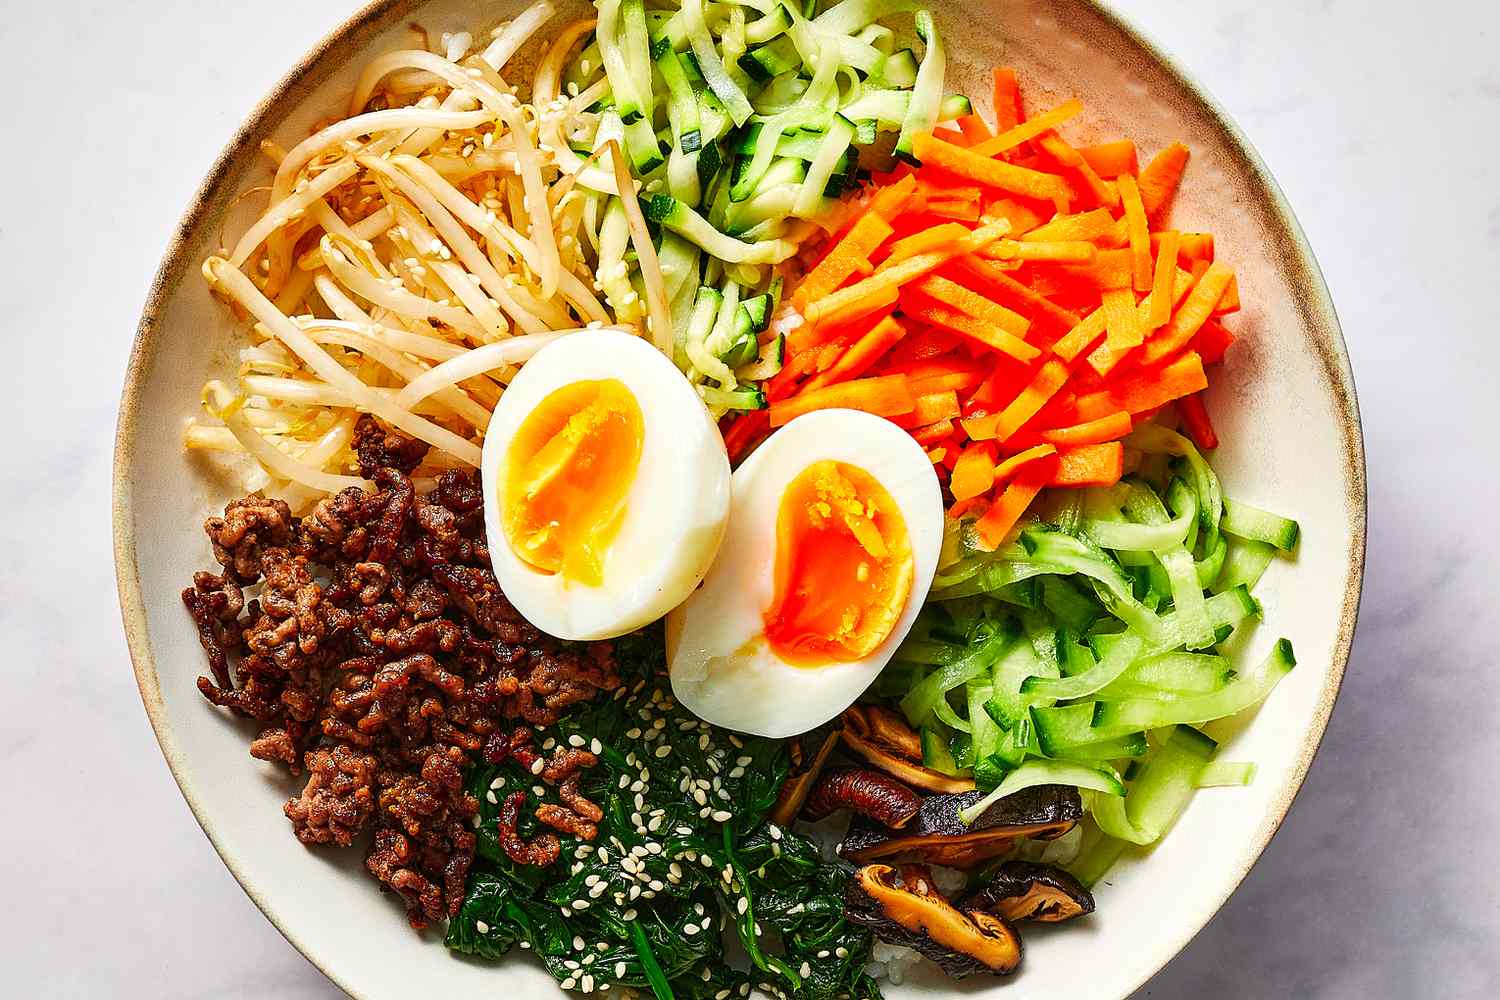 Add egg to the bibimbap in the bowl 